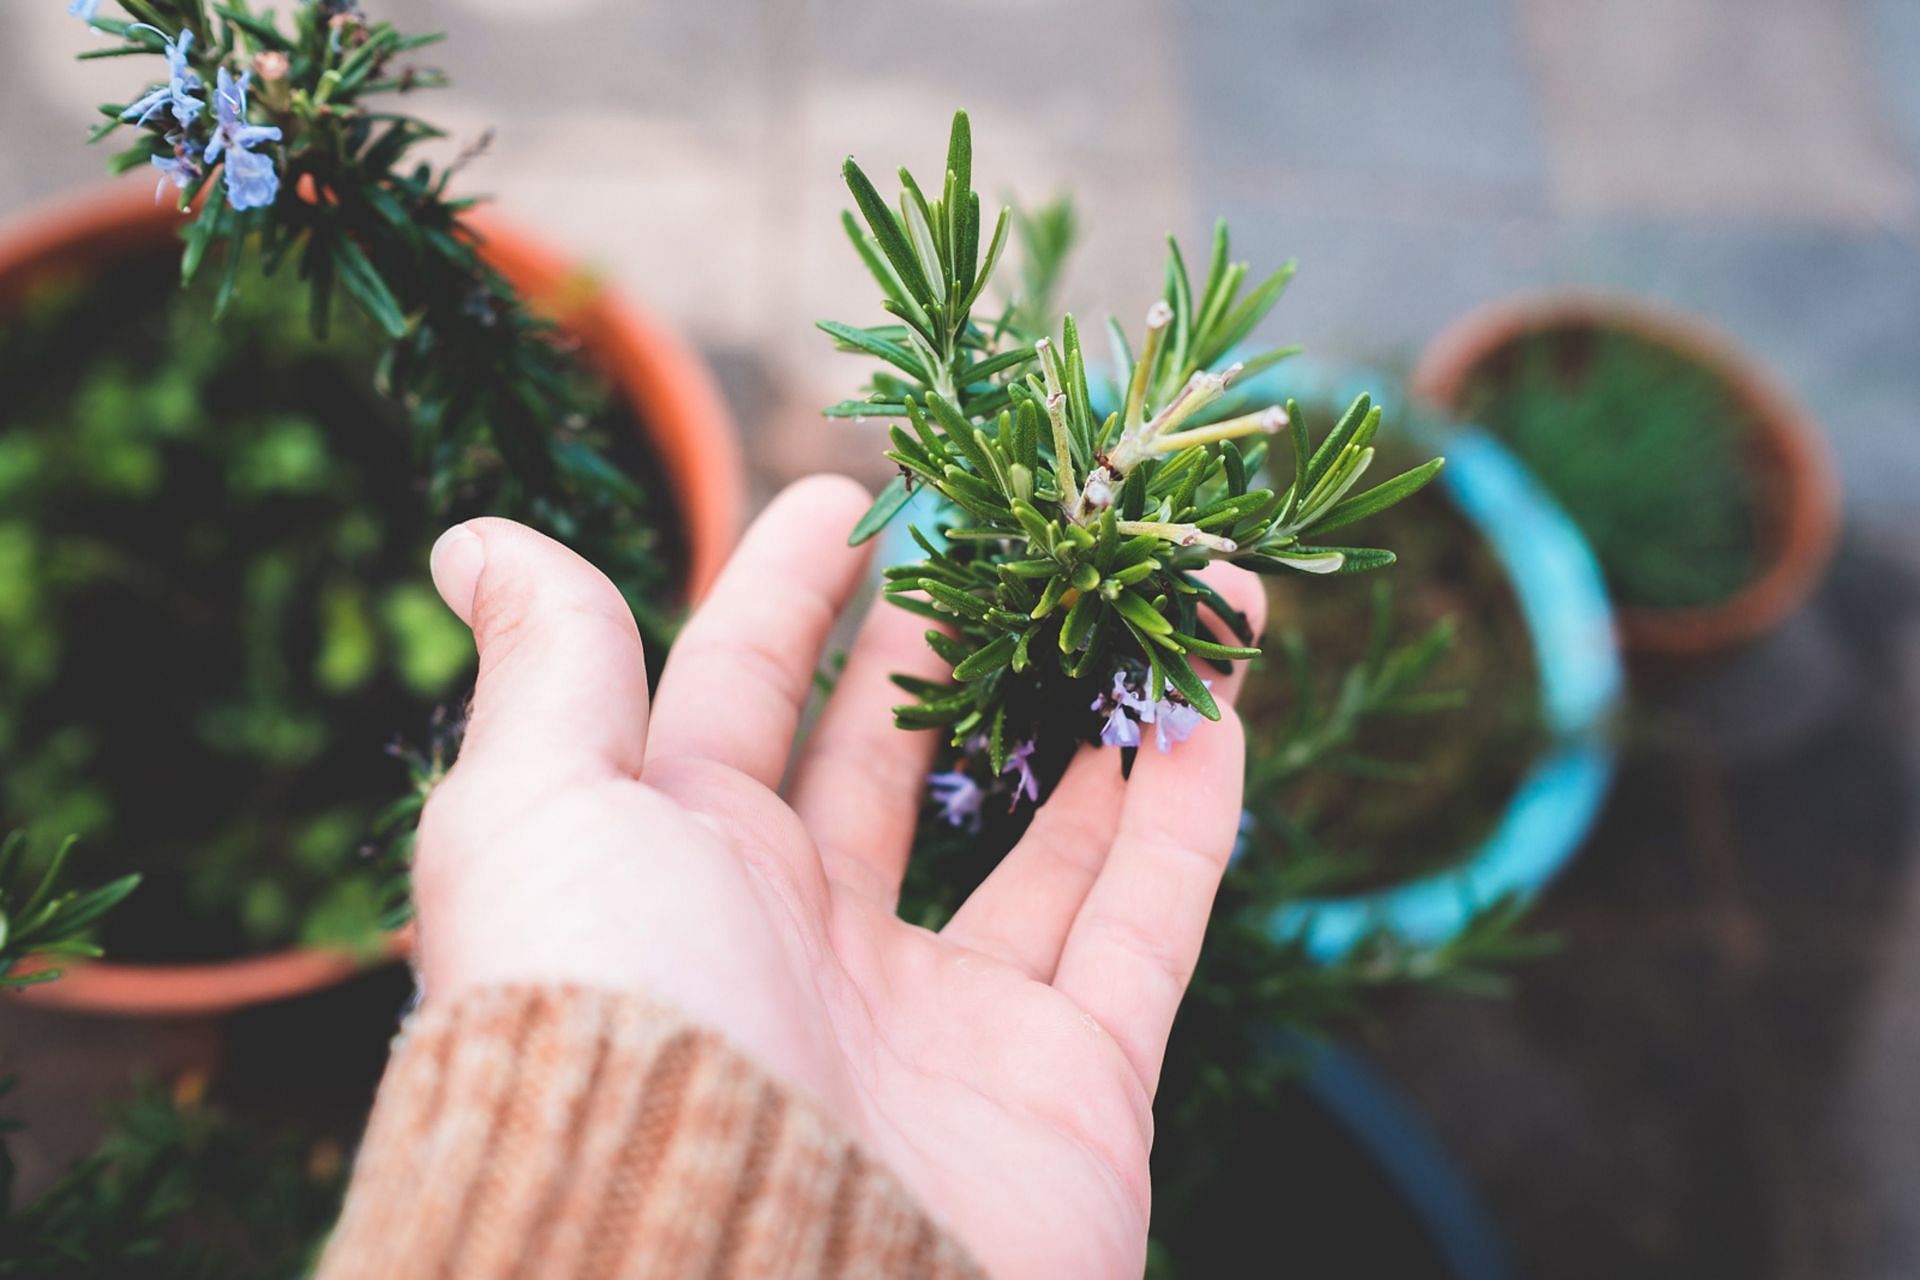 The medicinal uses of rosemary have entered the mental health world. (Image via Pexels/ Lachlan Ross)